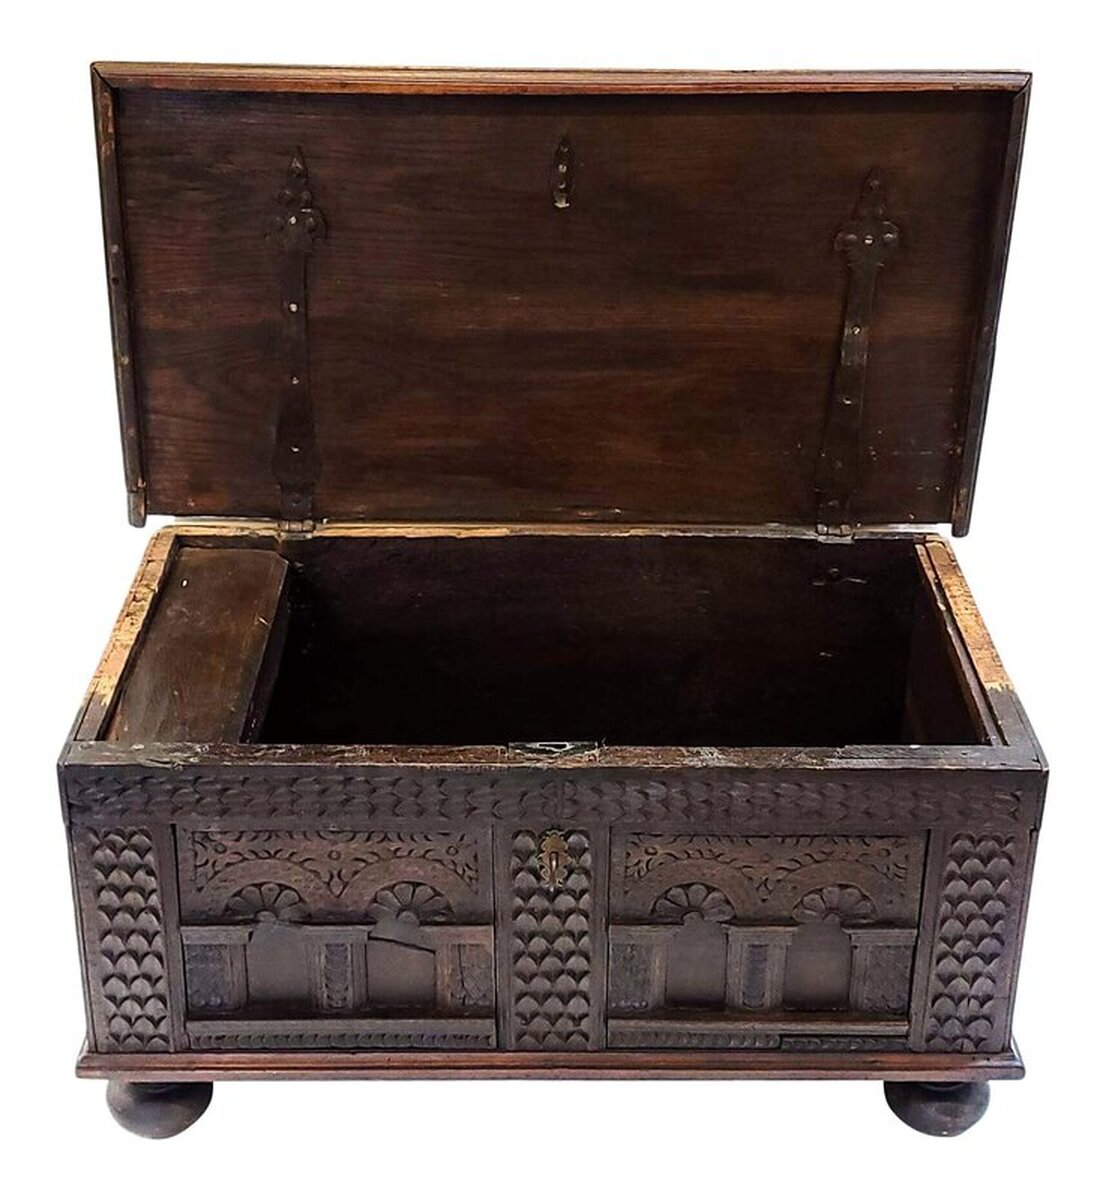 Spanish Renaissance period carved oak arcón with iron and brass mounts.  Antique chest from the 1600s is peg constructed of oak wood.  The lid is solid burl figured oak attached to the carcass with wrought iron diamond tipped strap hinges on the underside.  The front panels show carvings of foliated spandrels over arcading arches cupping floral fans. The arches stand on plinth bases.  The original key fits through a chased brass escutcheon sporting a foliated scroll and lozenge motif.  The carcass rests upon four turned oak bun feet.  The side panels are fitted with twisted wrought iron bail handles. The handles indicate this may have been built for use as a traveling trunk or campaign chest.  The back is of a plain board.  The interior is fitted with a hinged-lid box on the top left side for storage of candles and other small objects.  Outer surfaces are finished with hand rubbed paste wax.